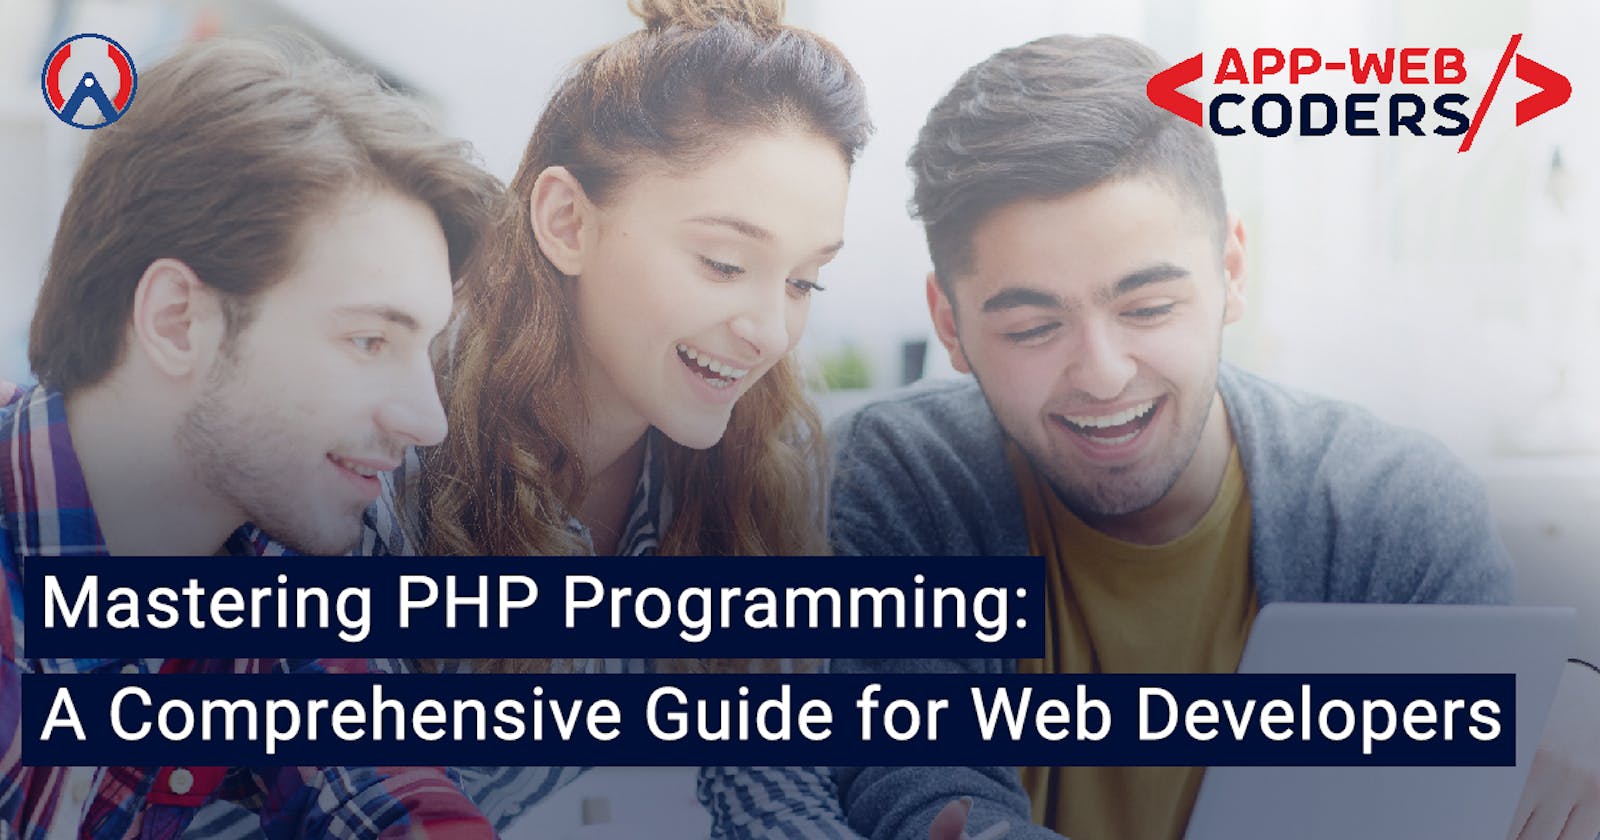 Mastering PHP Programming: A Comprehensive Guide for Web Developers